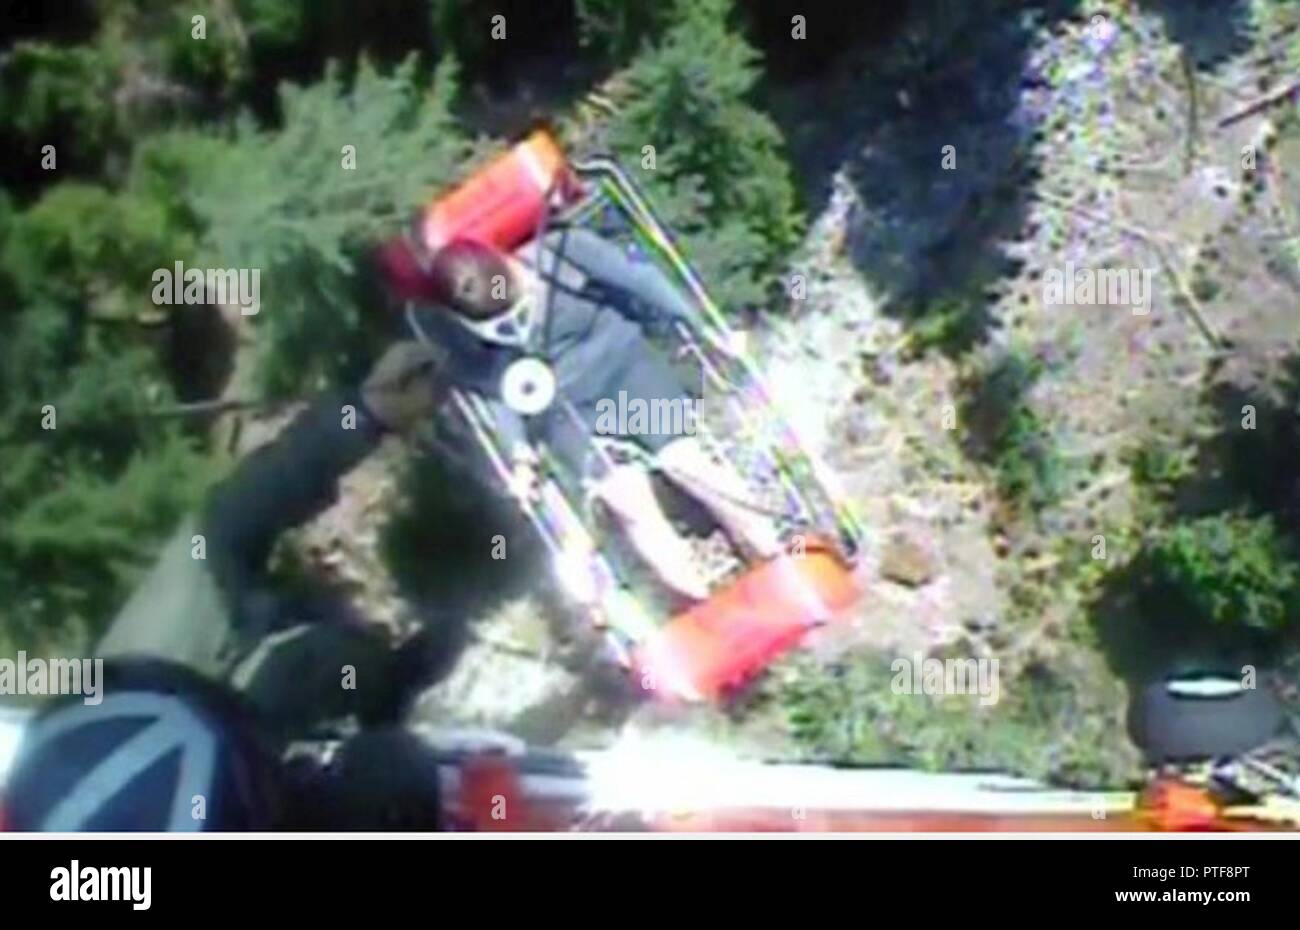 A Coast Guard helicopter crew hoists 40-year-old female hiker to safety near Agness, Oregon, after she was reported missing and spent the night near Game Lake Trail in Rogue River-Siskiyou National Forest, July 20, 2017. The aircrew aboard an MH-65 Dolphin helicopter from Coast Guard Sector North Bend hoisted the hiker at approximately 12:30 p.m. and transferred her to the Curry County Sheriff Department who were waiting in Agness. Stock Photo